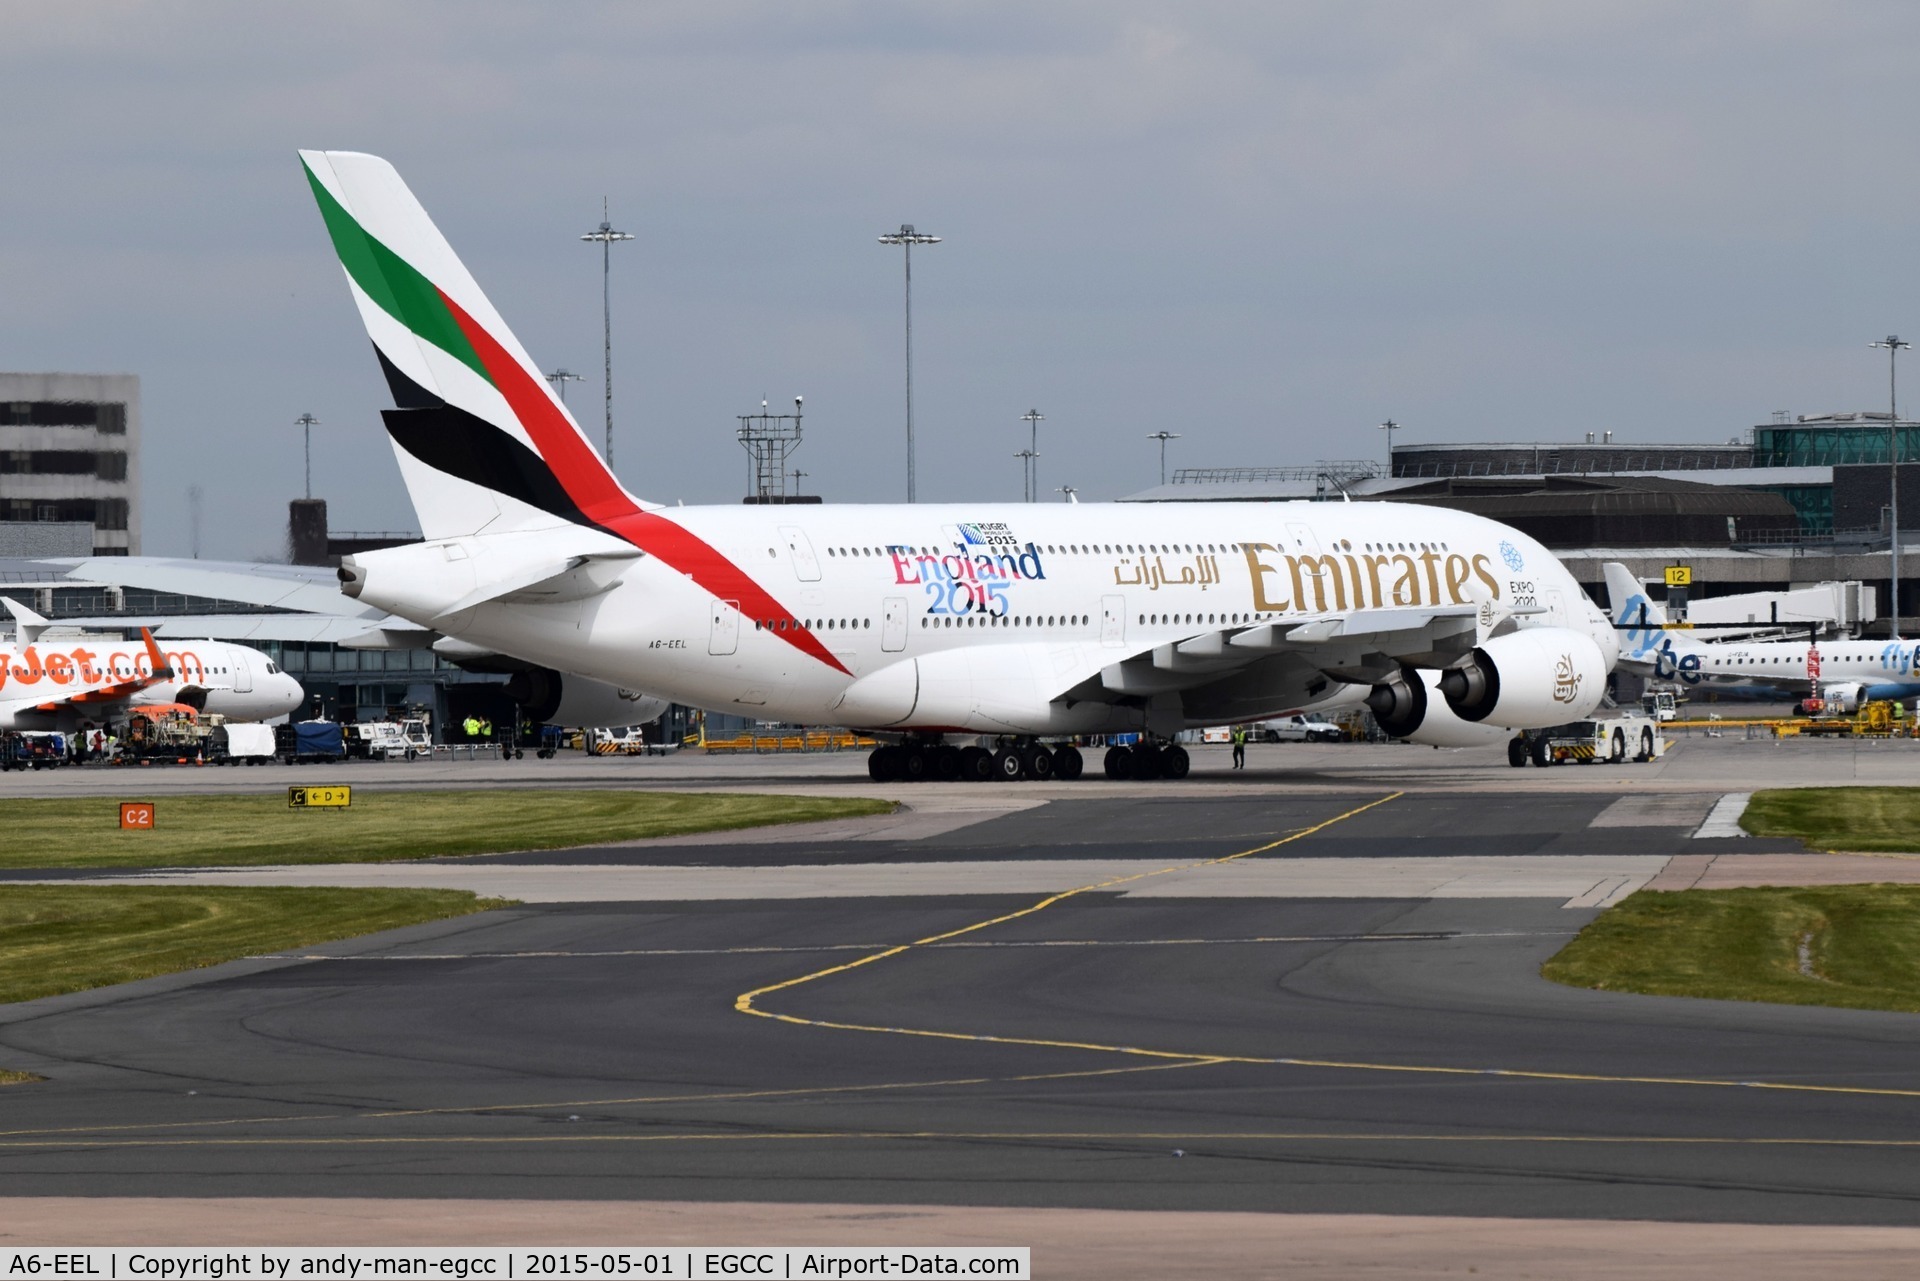 A6-EEL, 2013 Airbus A380-861 C/N 133, being pushed back by an tug and soon will taxi out to the runway for take off on -05L